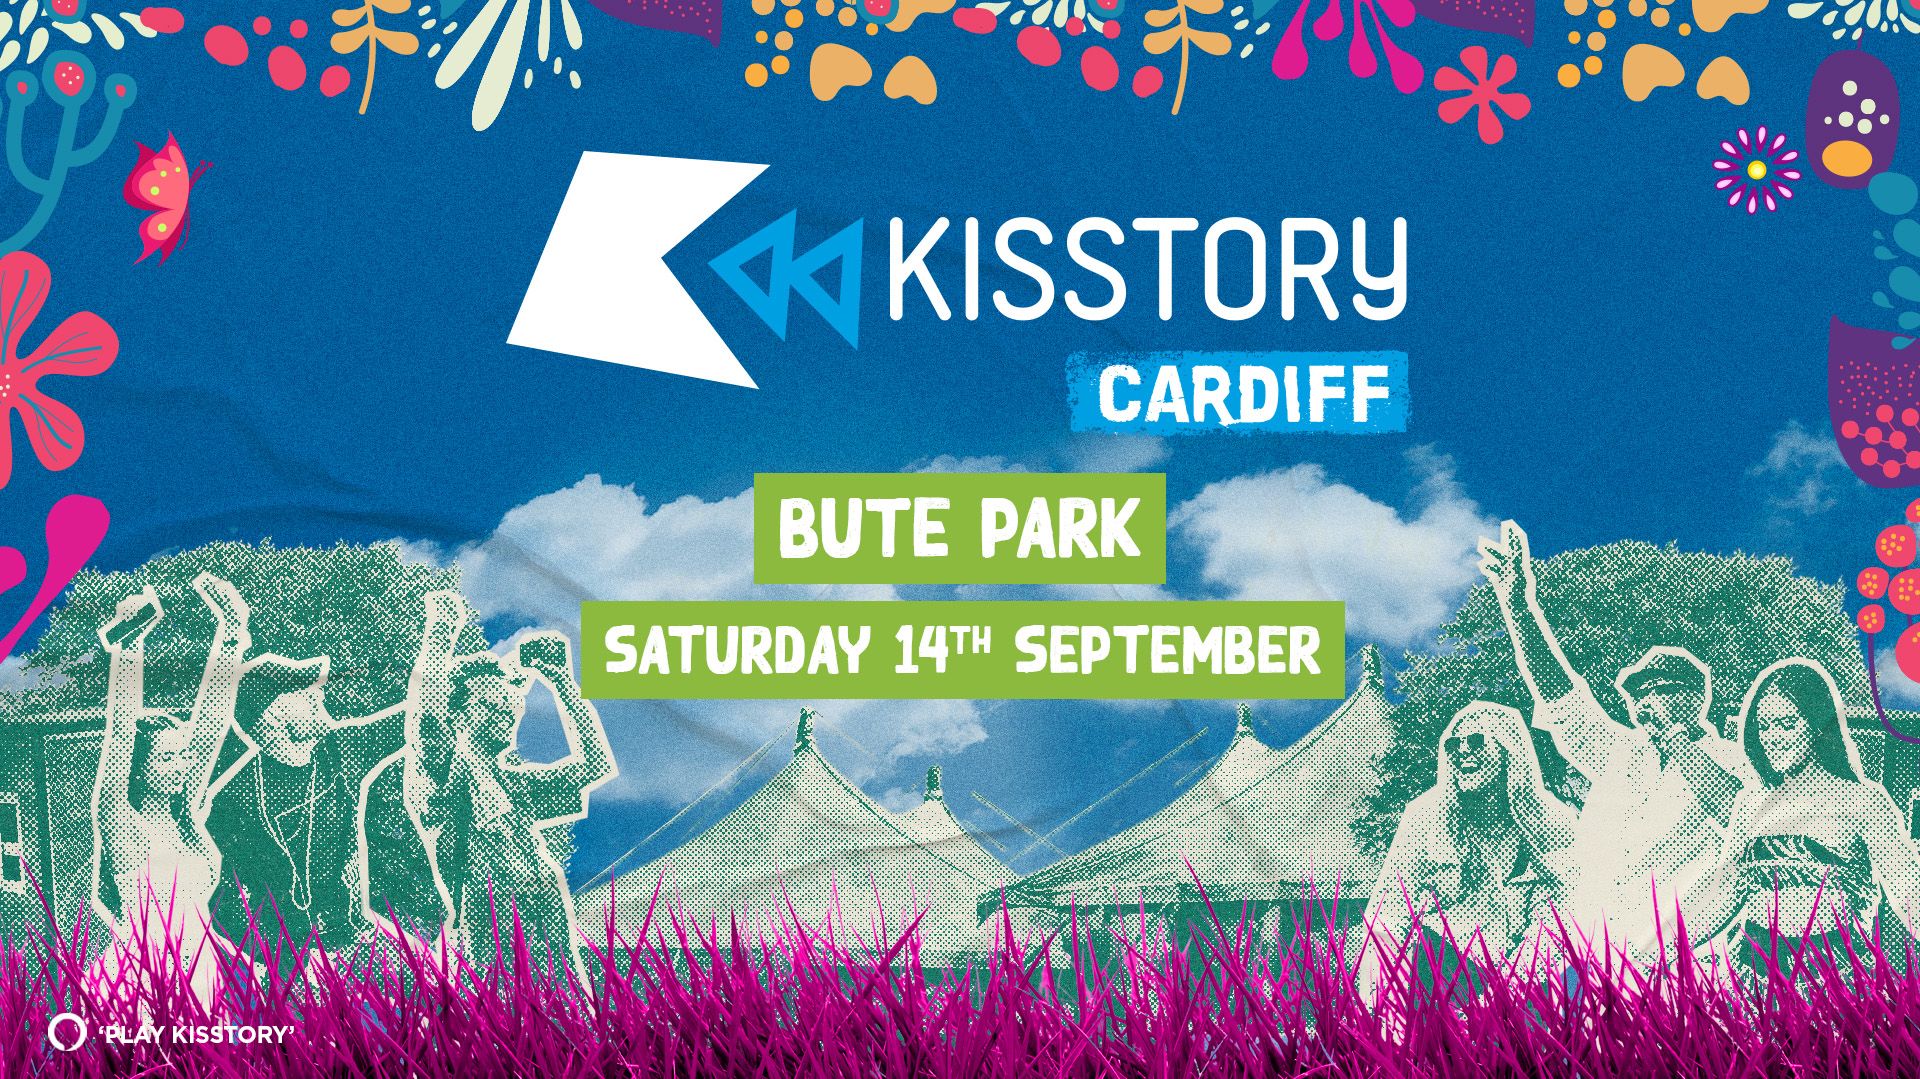 KISSTORY Cardiff Get your tickets NOW!